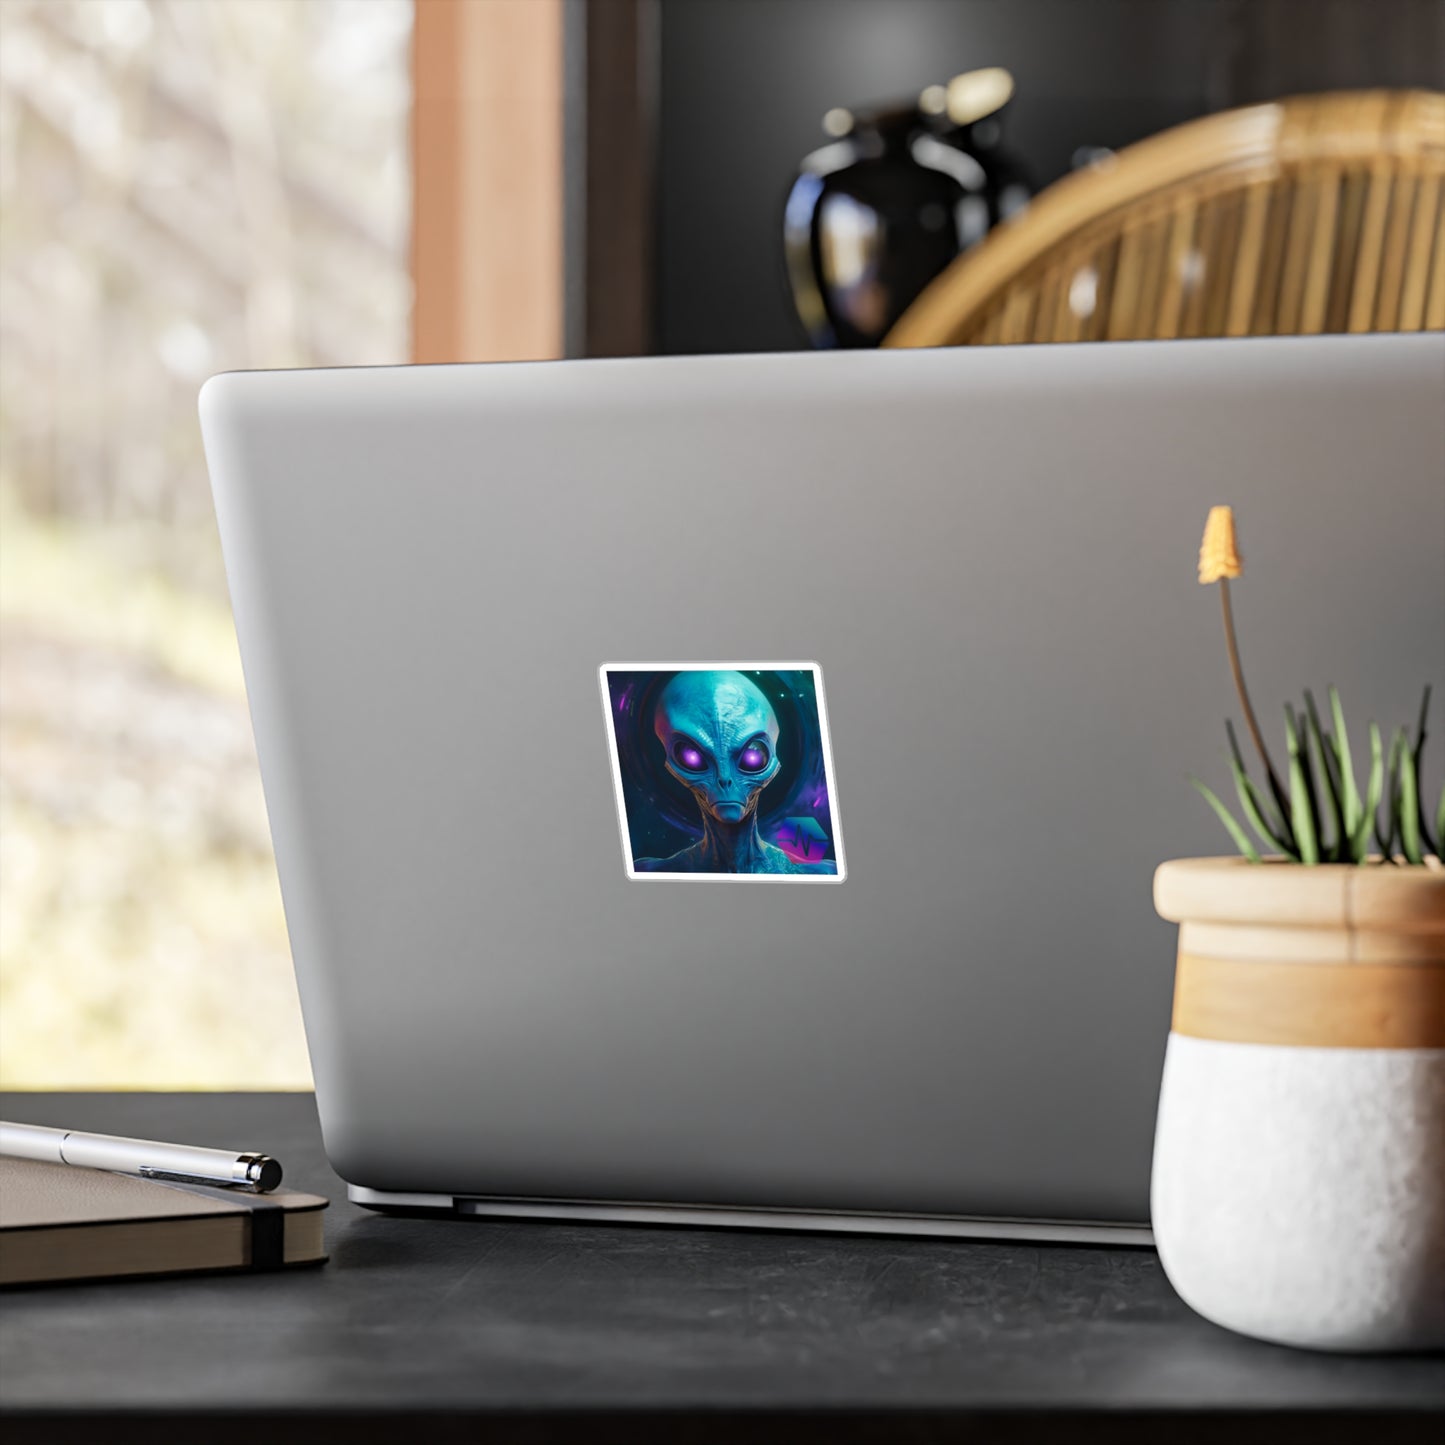 Pulse Chain Alien Vinyl Decal - DeFi Outfitters